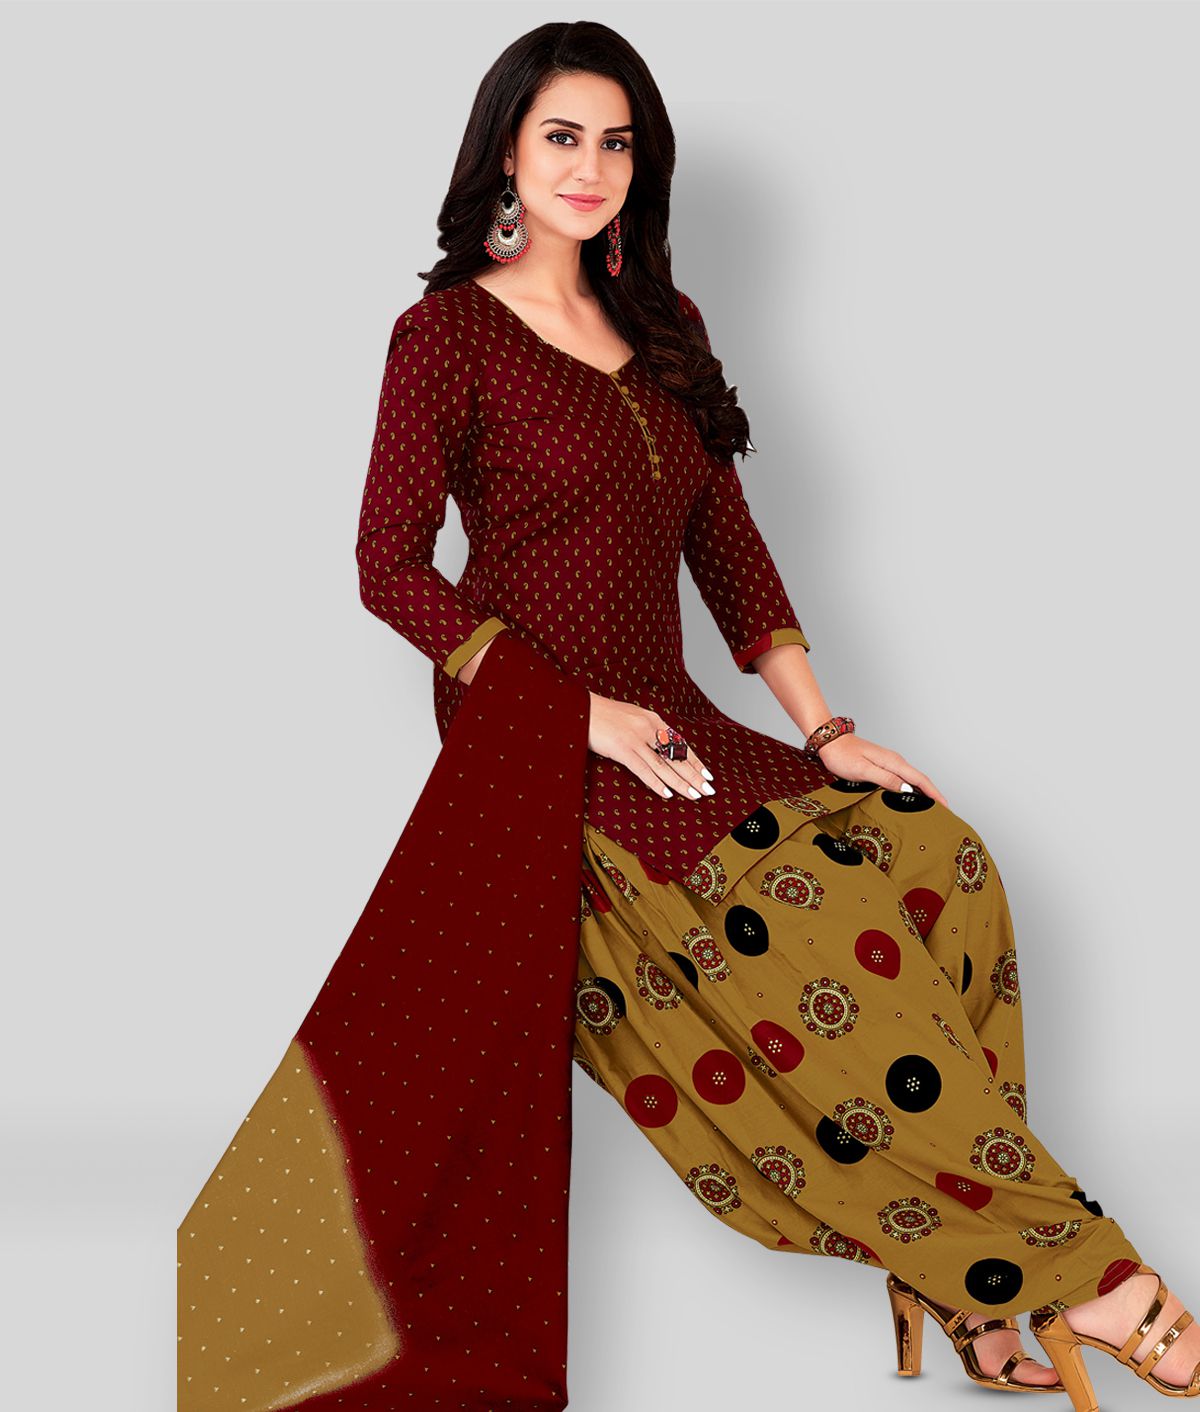     			shree jeenmata collection - Maroon Straight Cotton Women's Stitched Salwar Suit ( Pack of 1 )